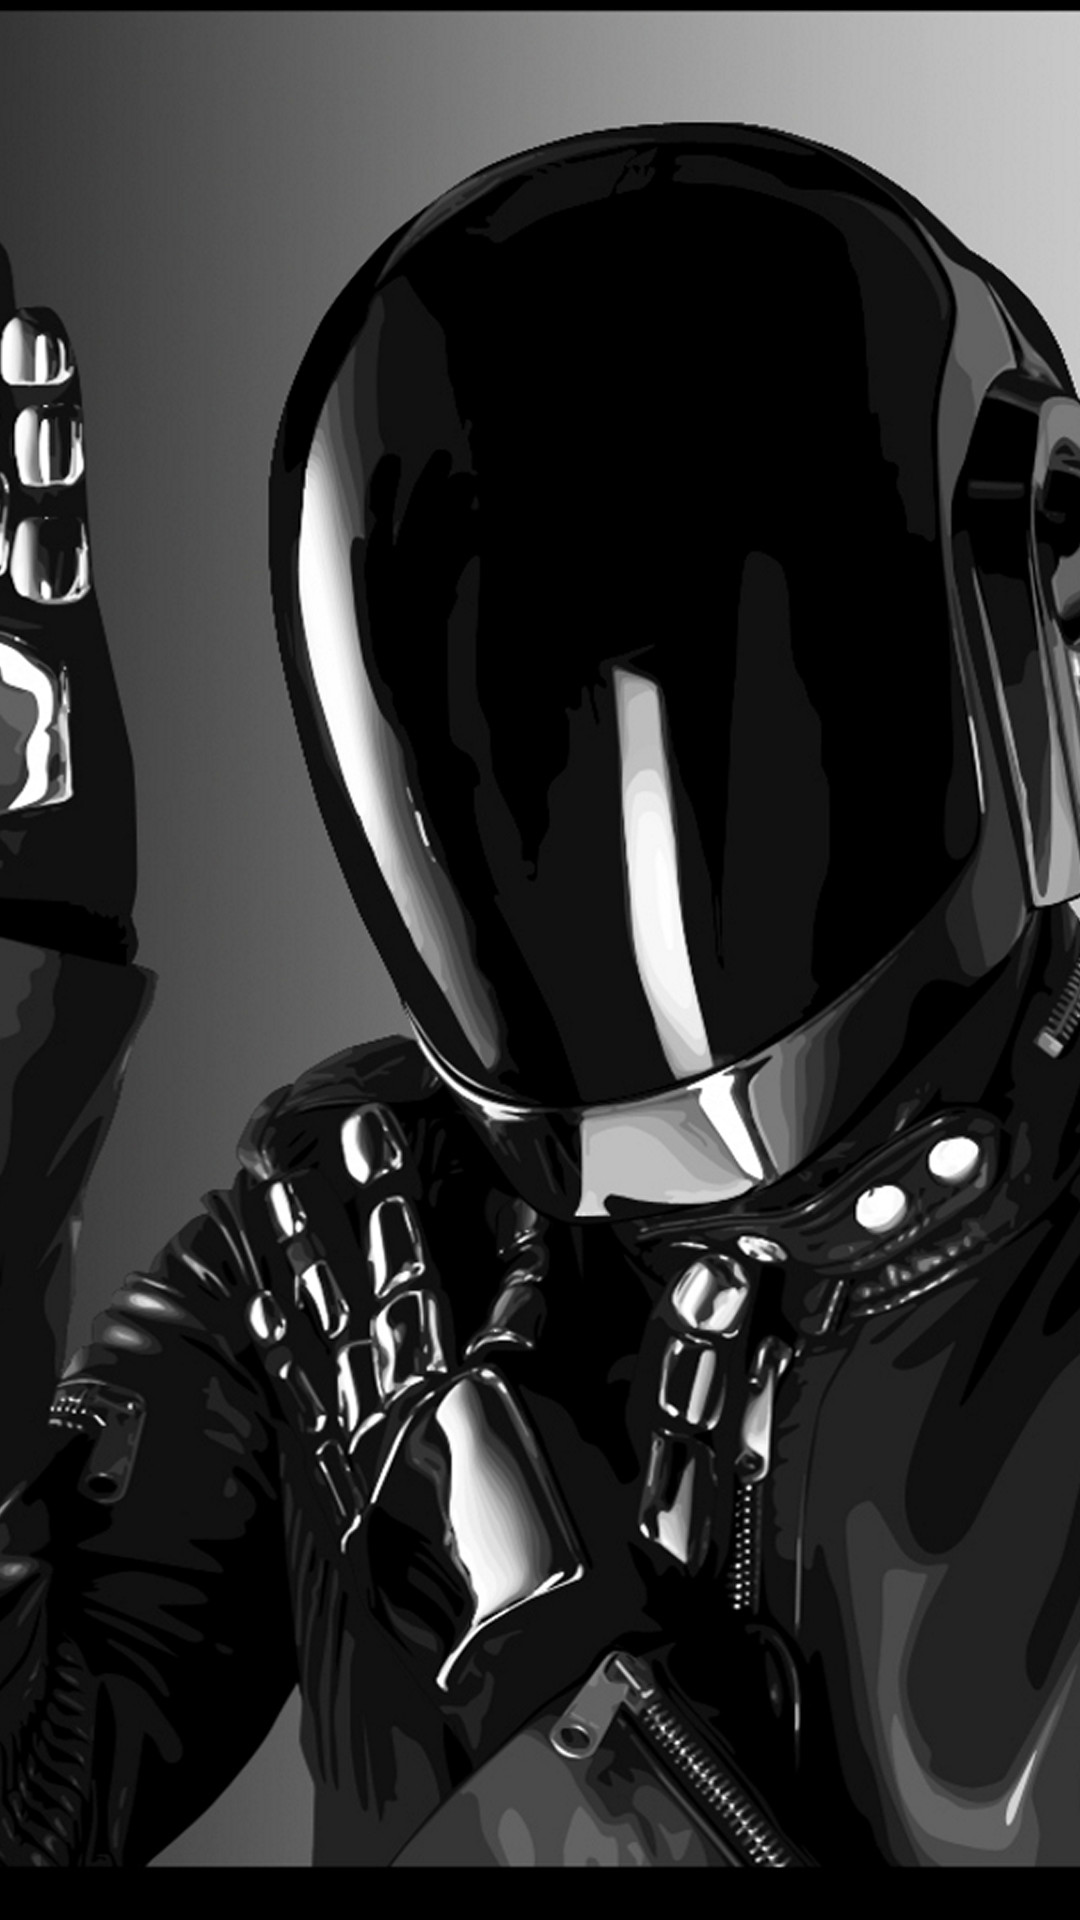 1080x1920 Daft Punk Wallpapers High Quality Download Free | HD Wallpapers | Pinterest  | Daft punk, Hd wallpaper and Wallpaper